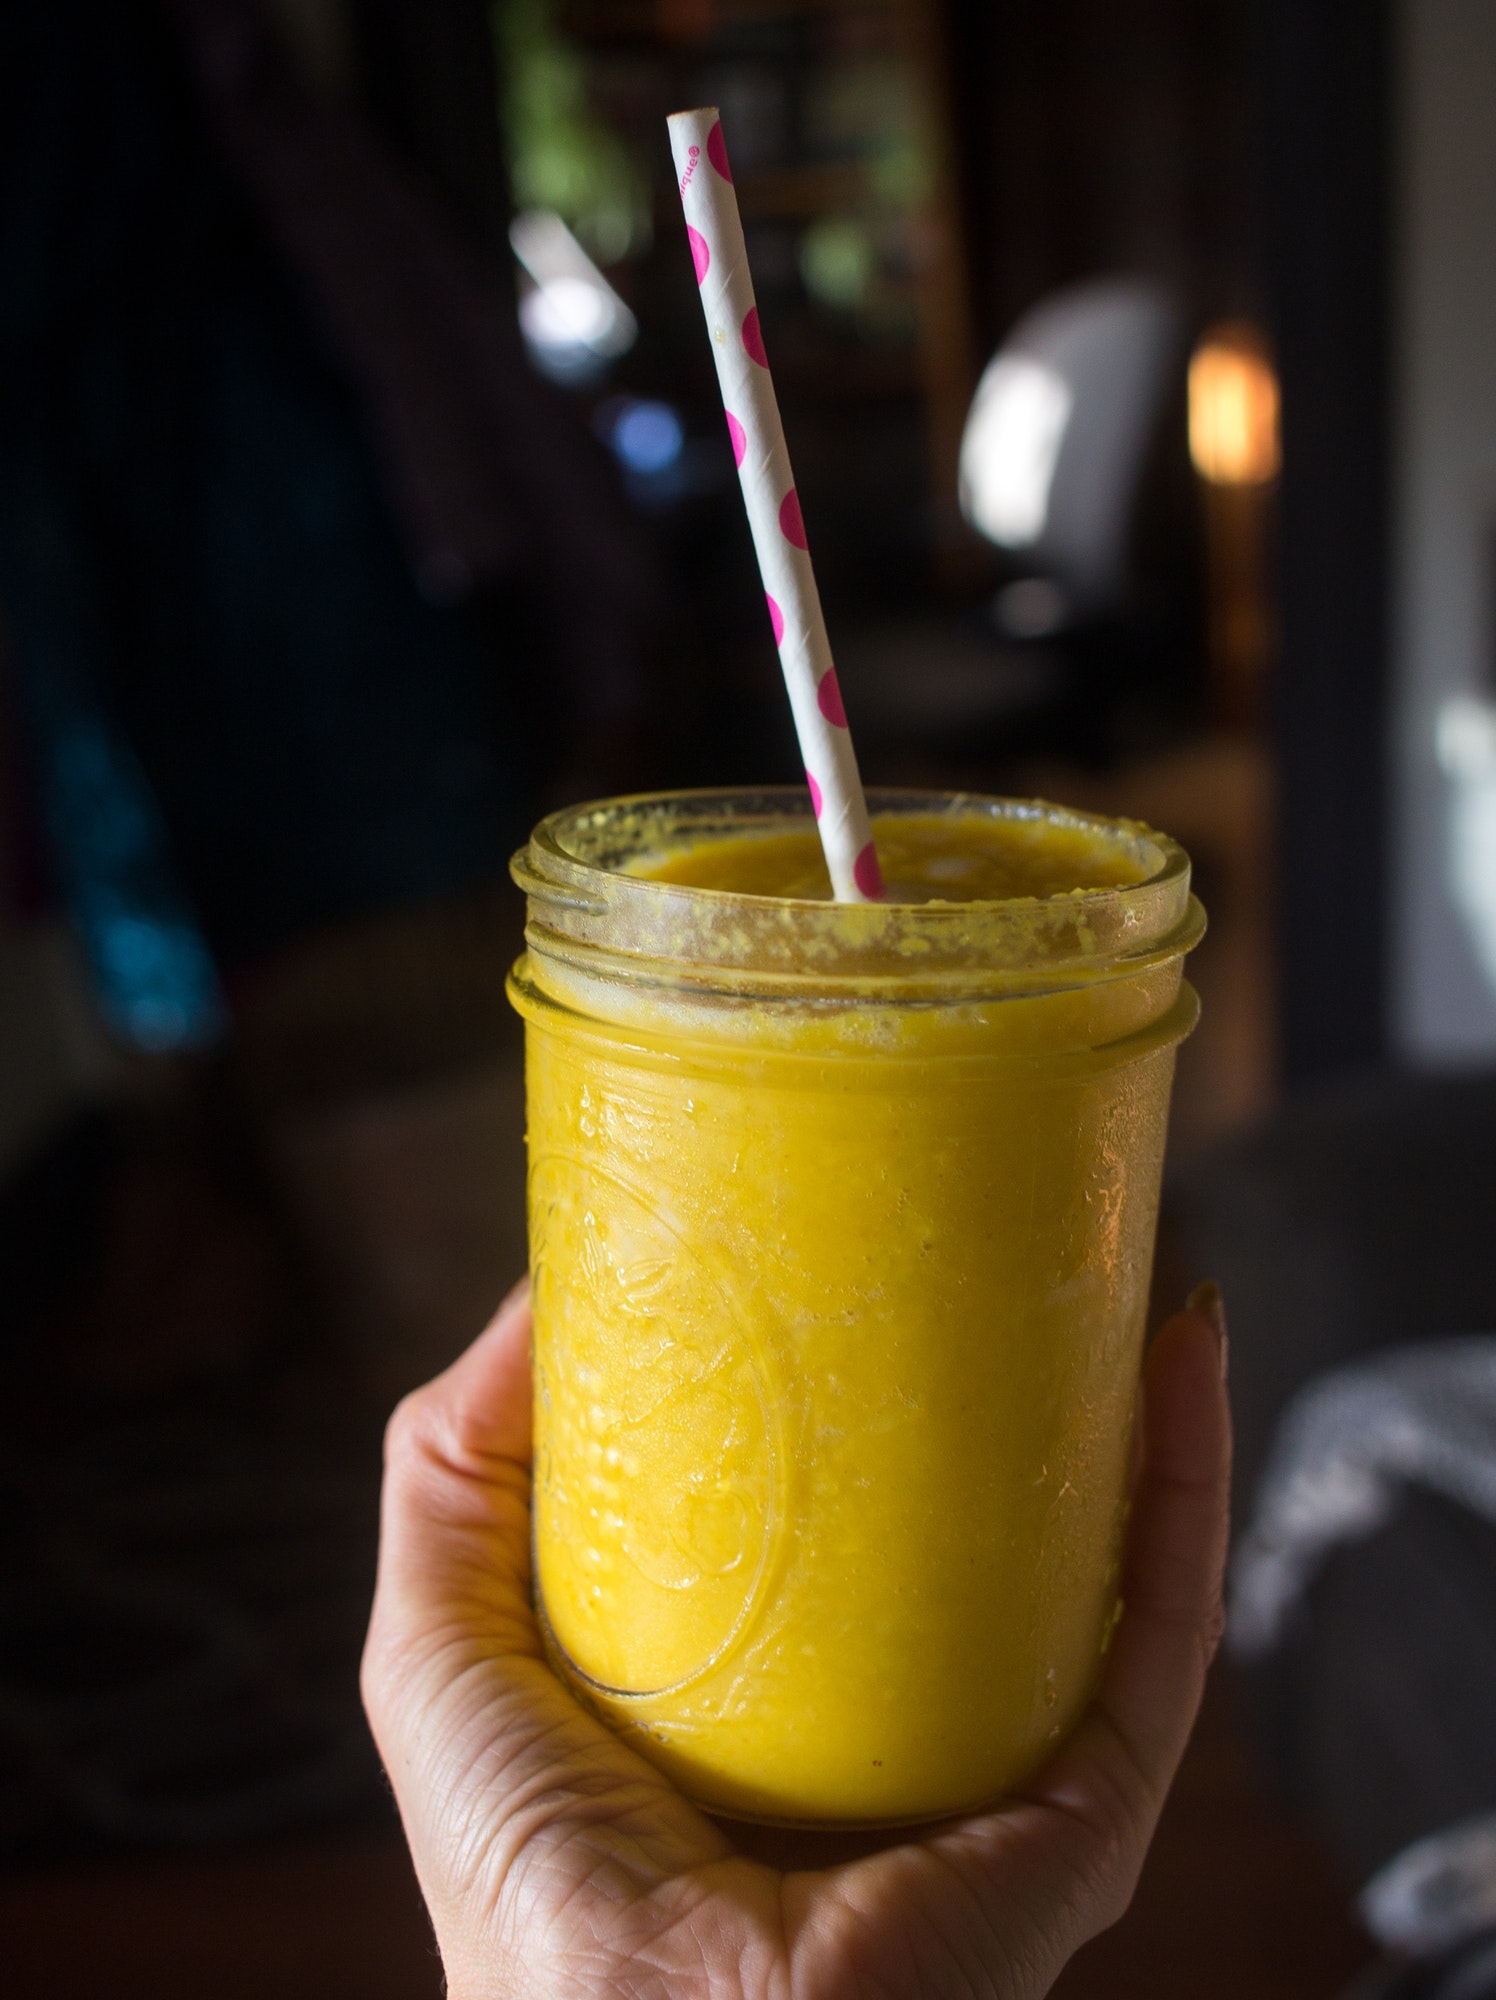 Mango turmeric smoothie with paper straw